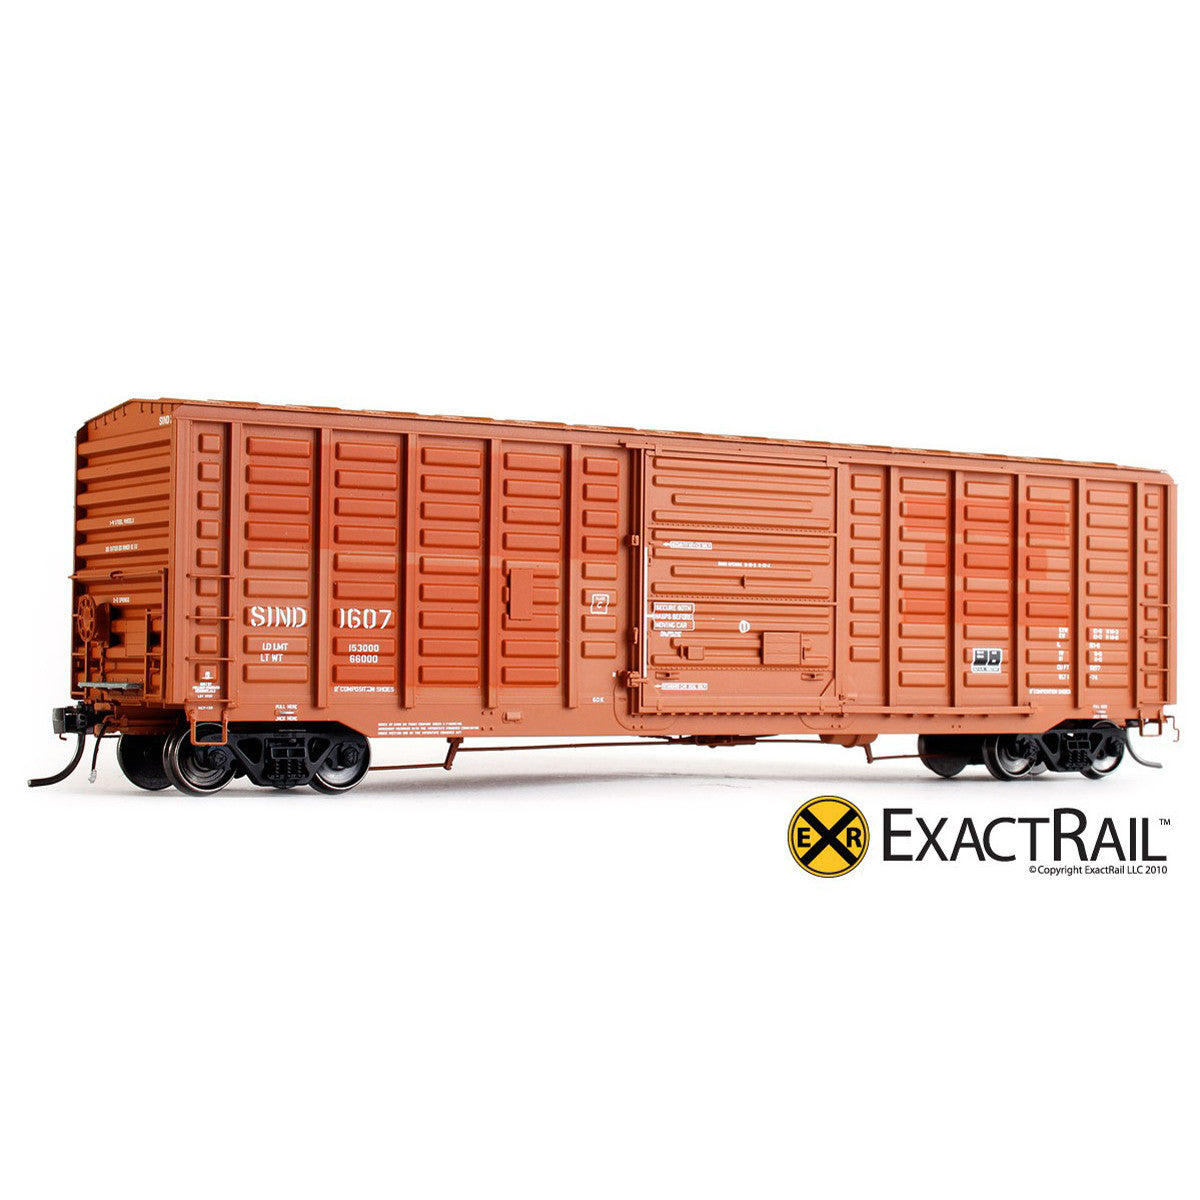 SIND - Model Waffle HO ExactRail ExactRail PS Boxcar Scale 50\' Trains | | Model